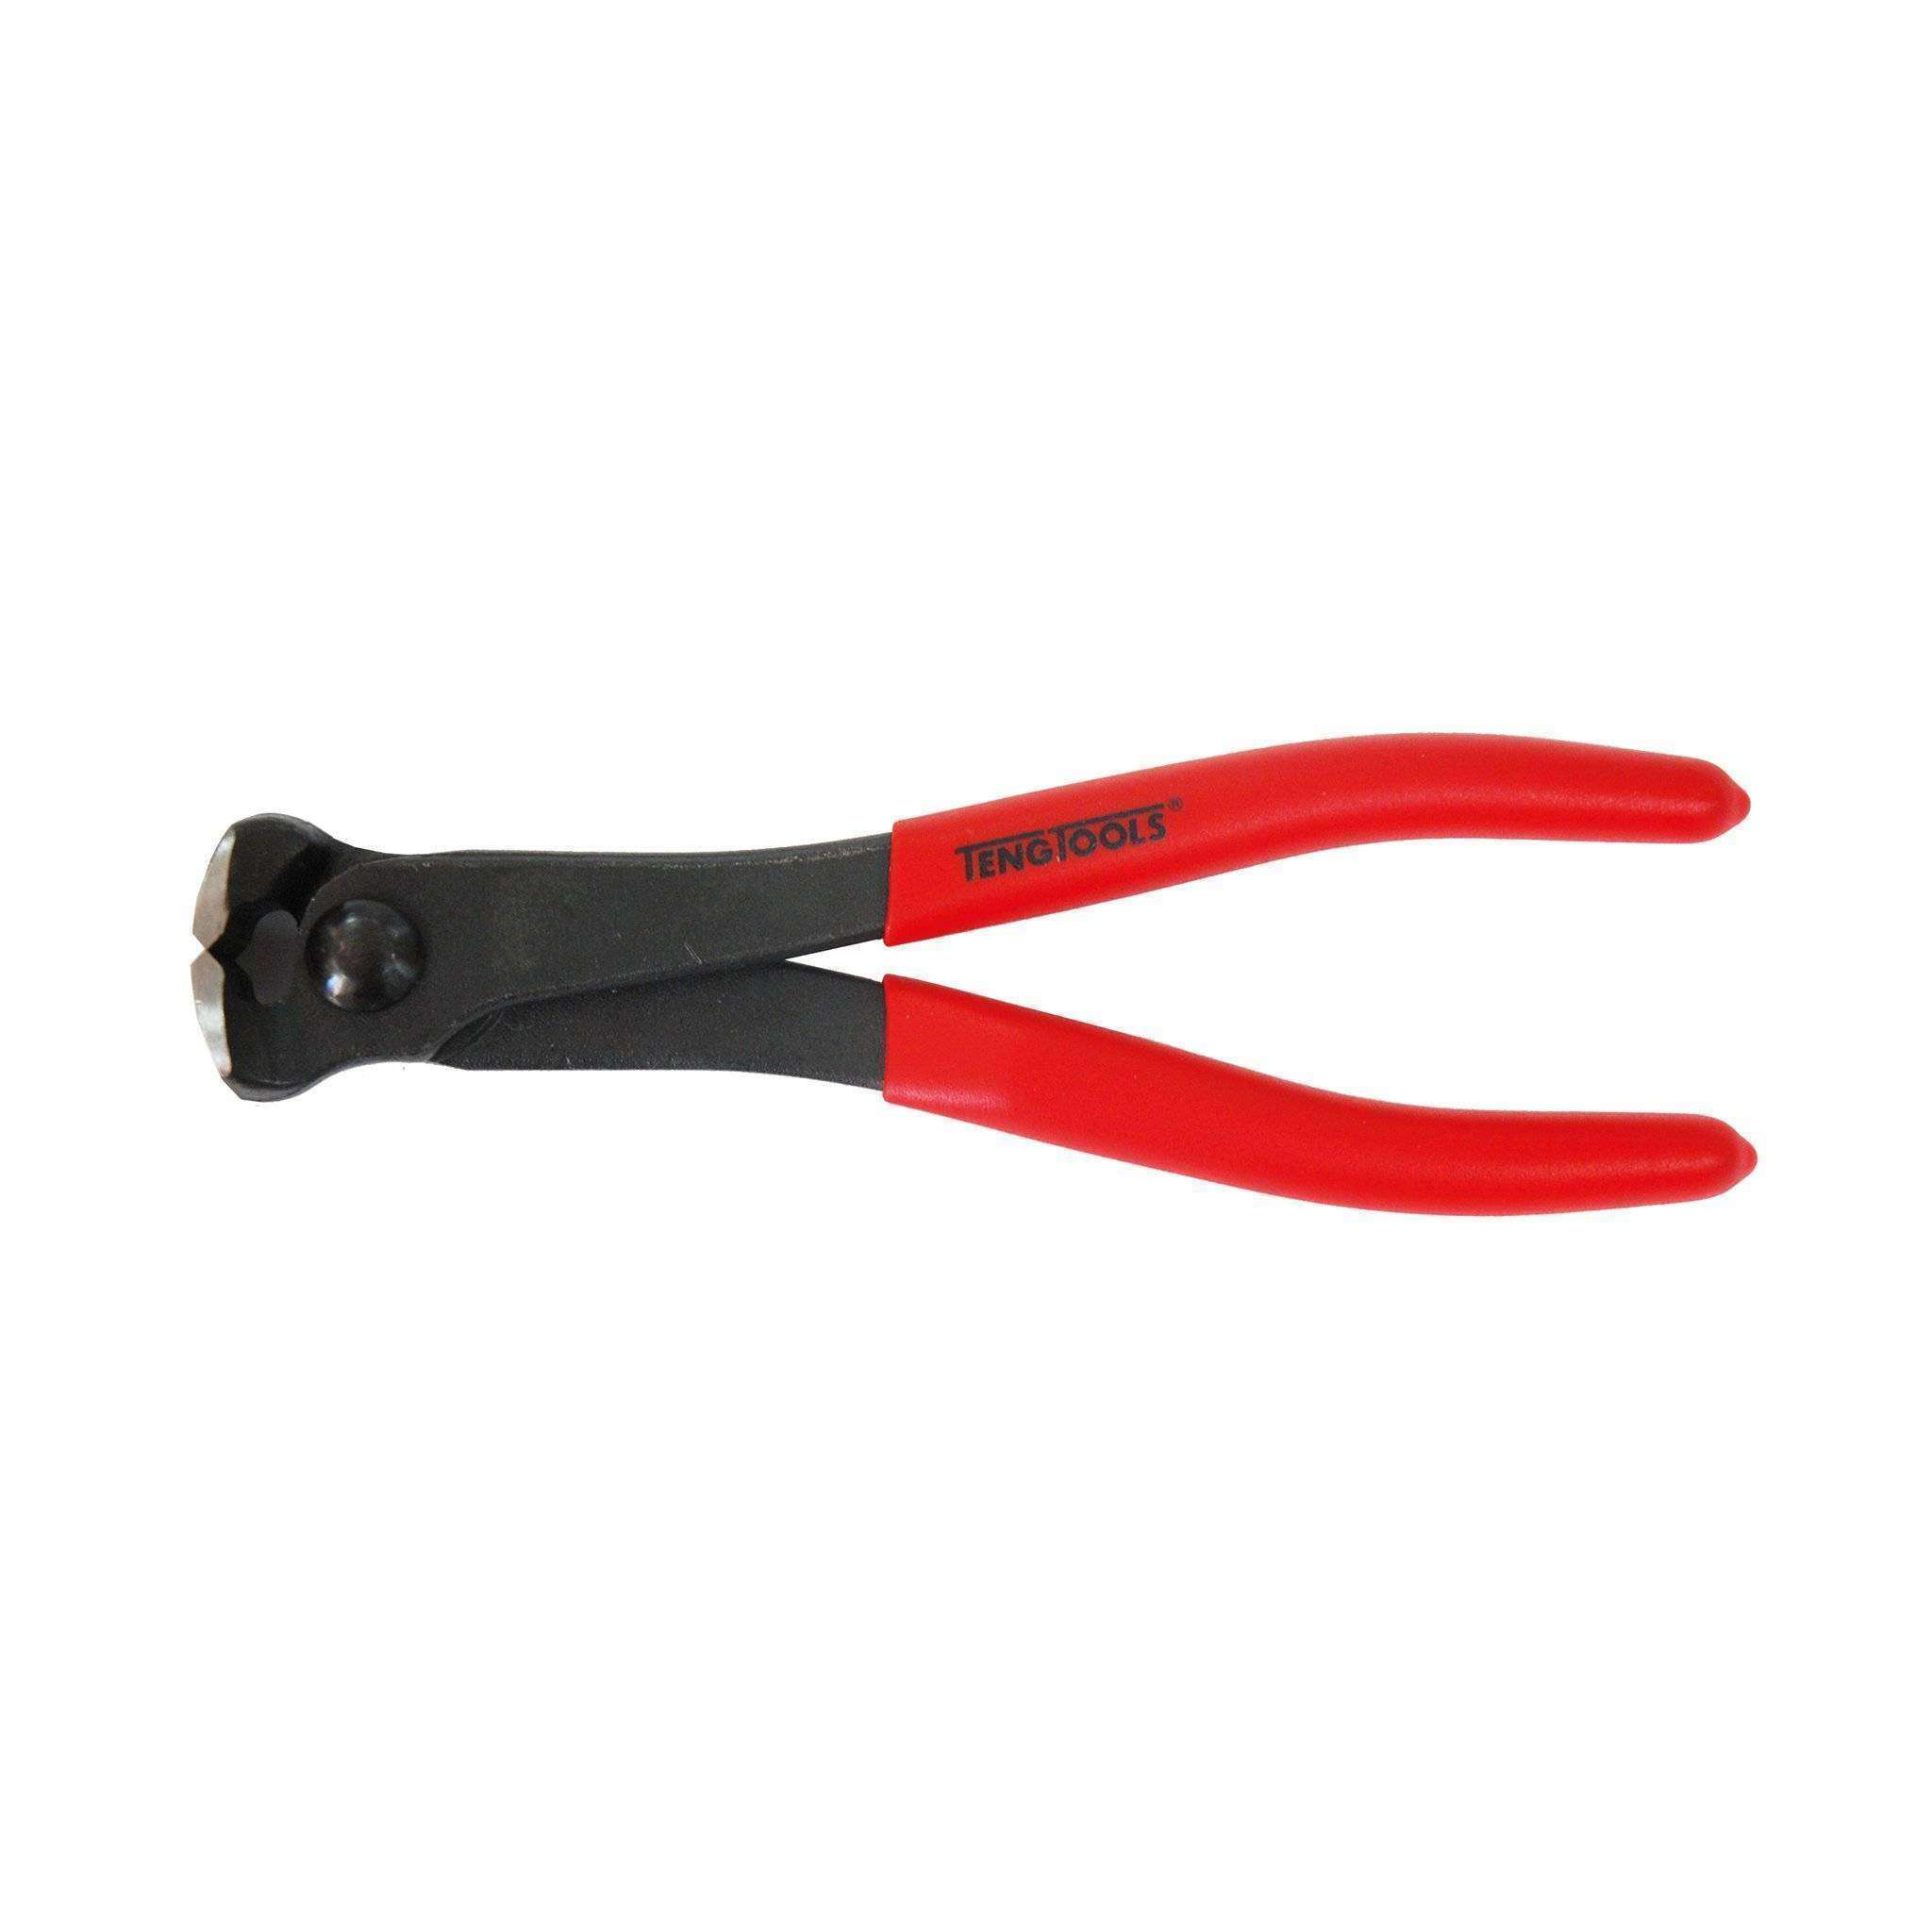 Teng Tools 6 Inch High Leverage End Cutting Nipper Pliers - MB448-6